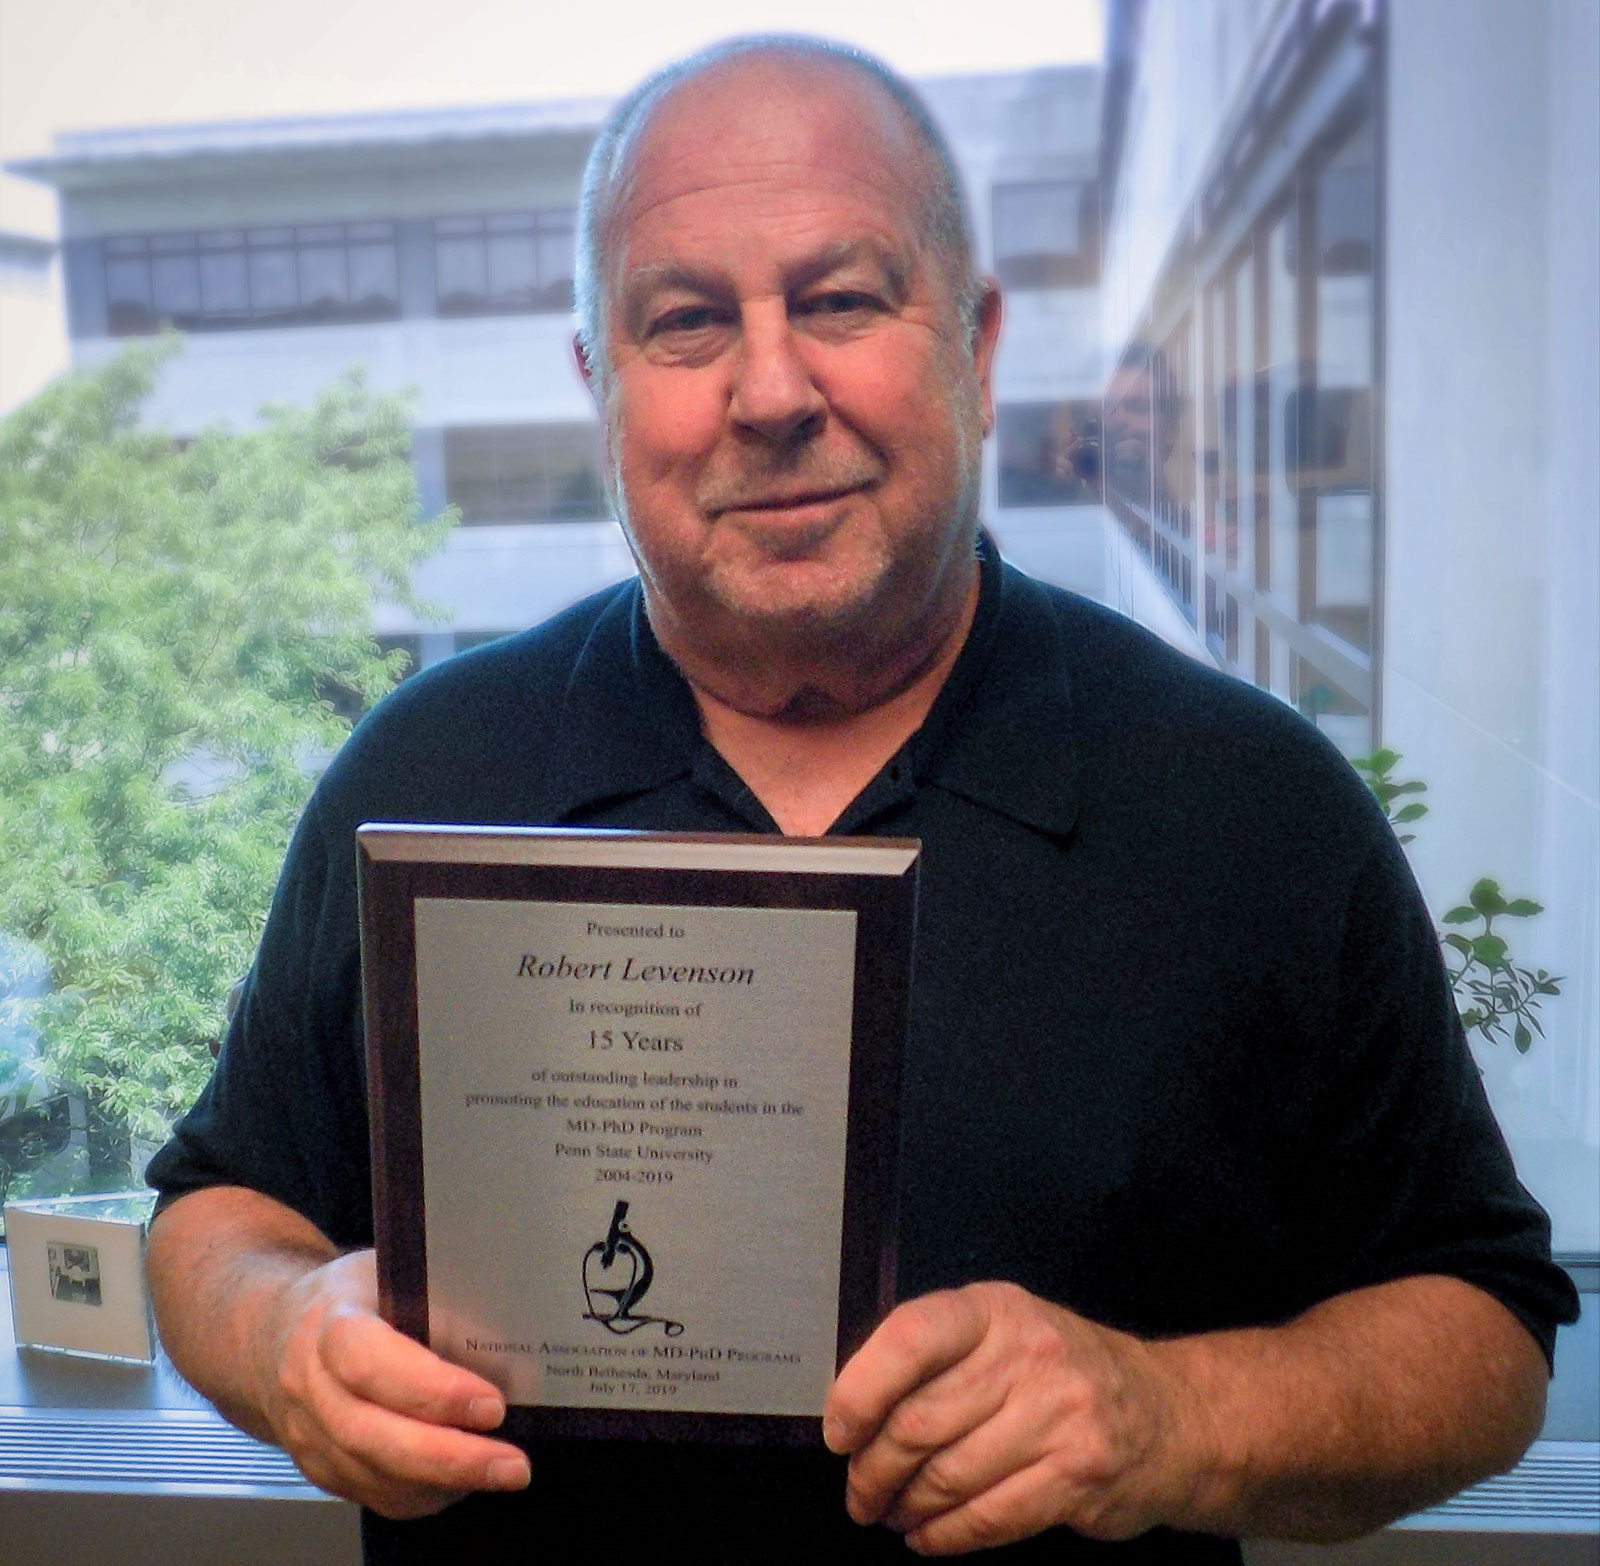 Dr. Robert Levenson of Penn State College of Medicine is seen in front of a window, holding a plaque.